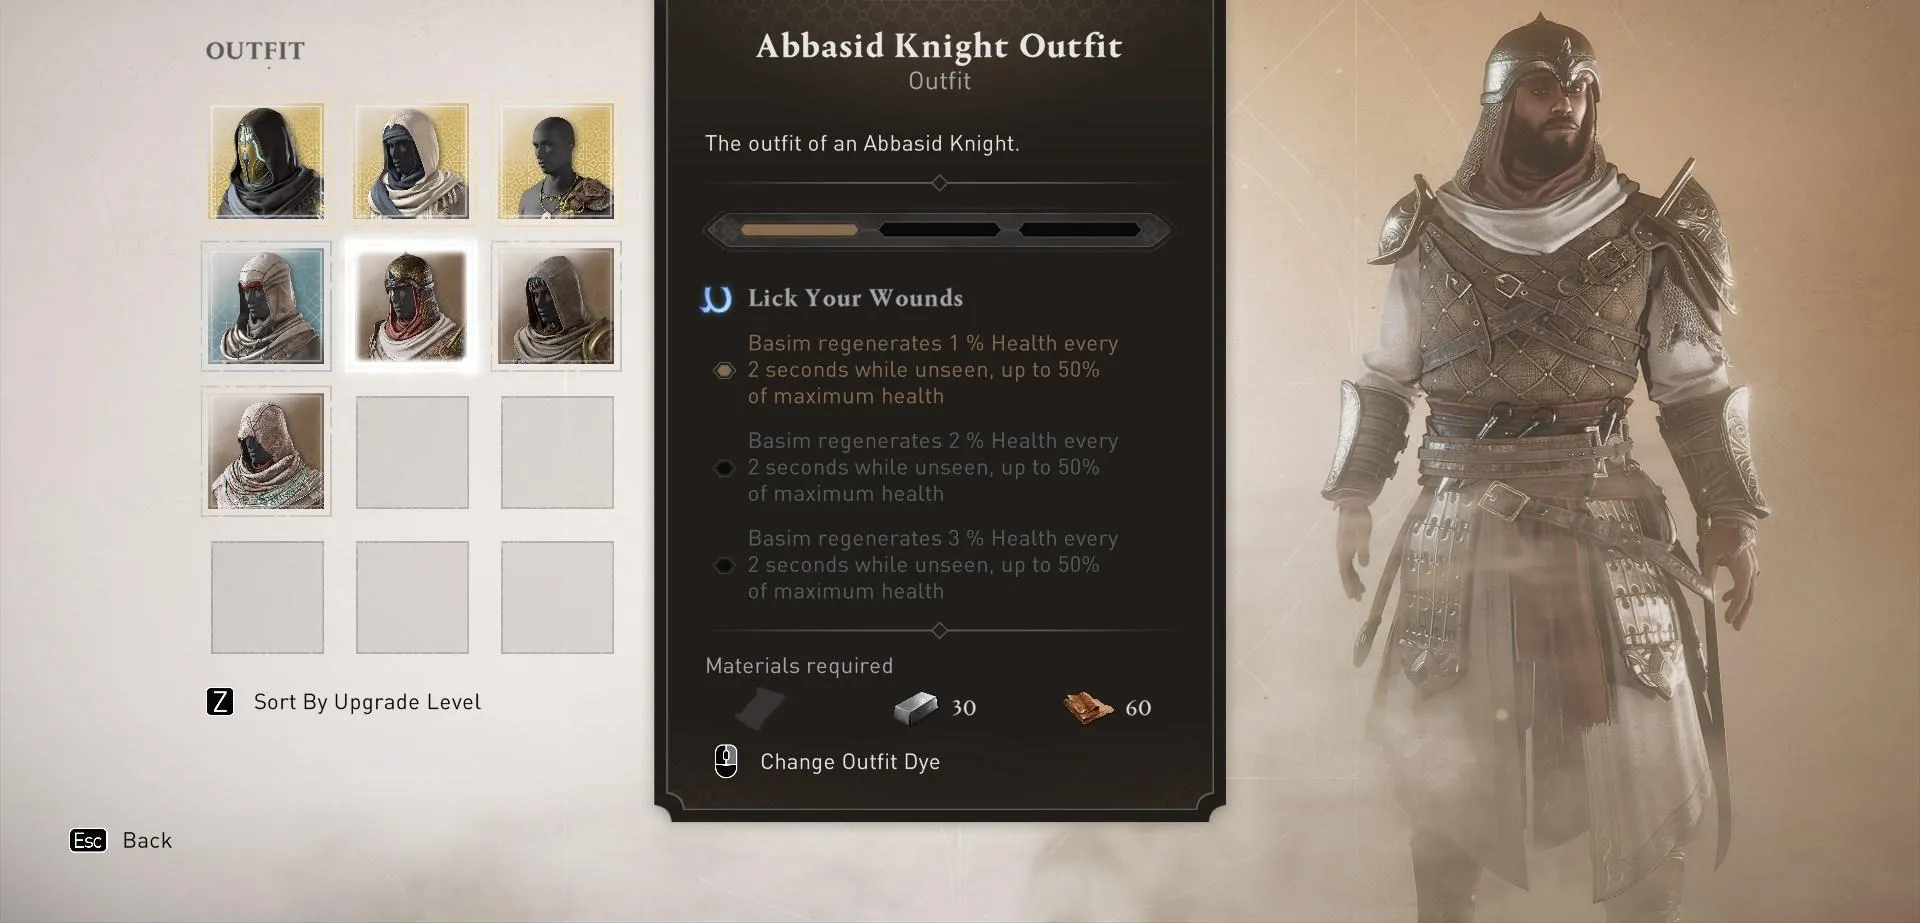 Abbasid Knight Outfit